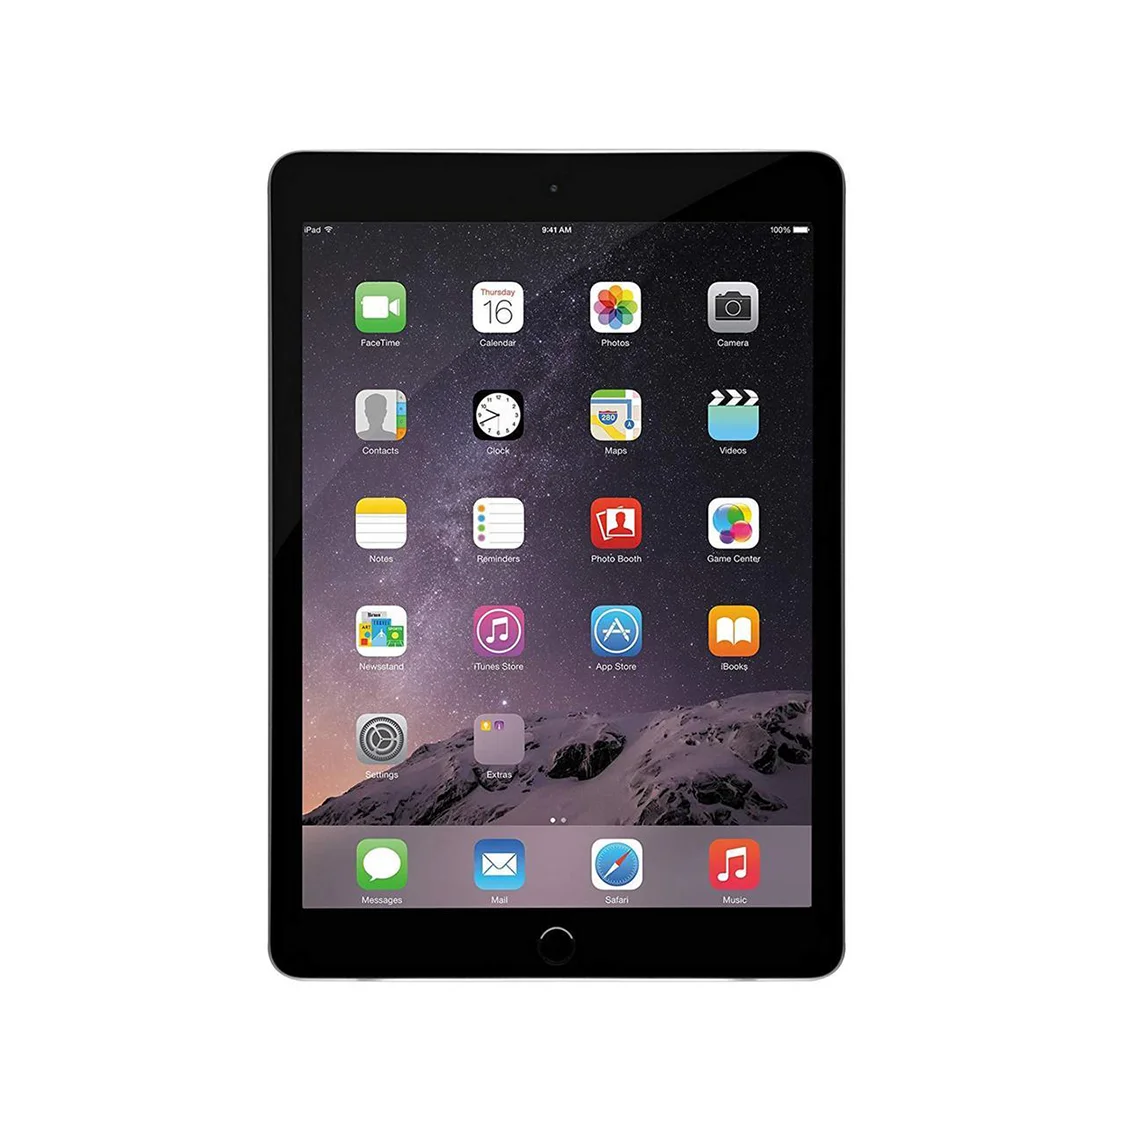 apple ipad air 1 md785llb 90 new apple a7 16 32gb flash storage 9 7 2048 x 1536 no touch id tablet pc space graysliver free global shipping